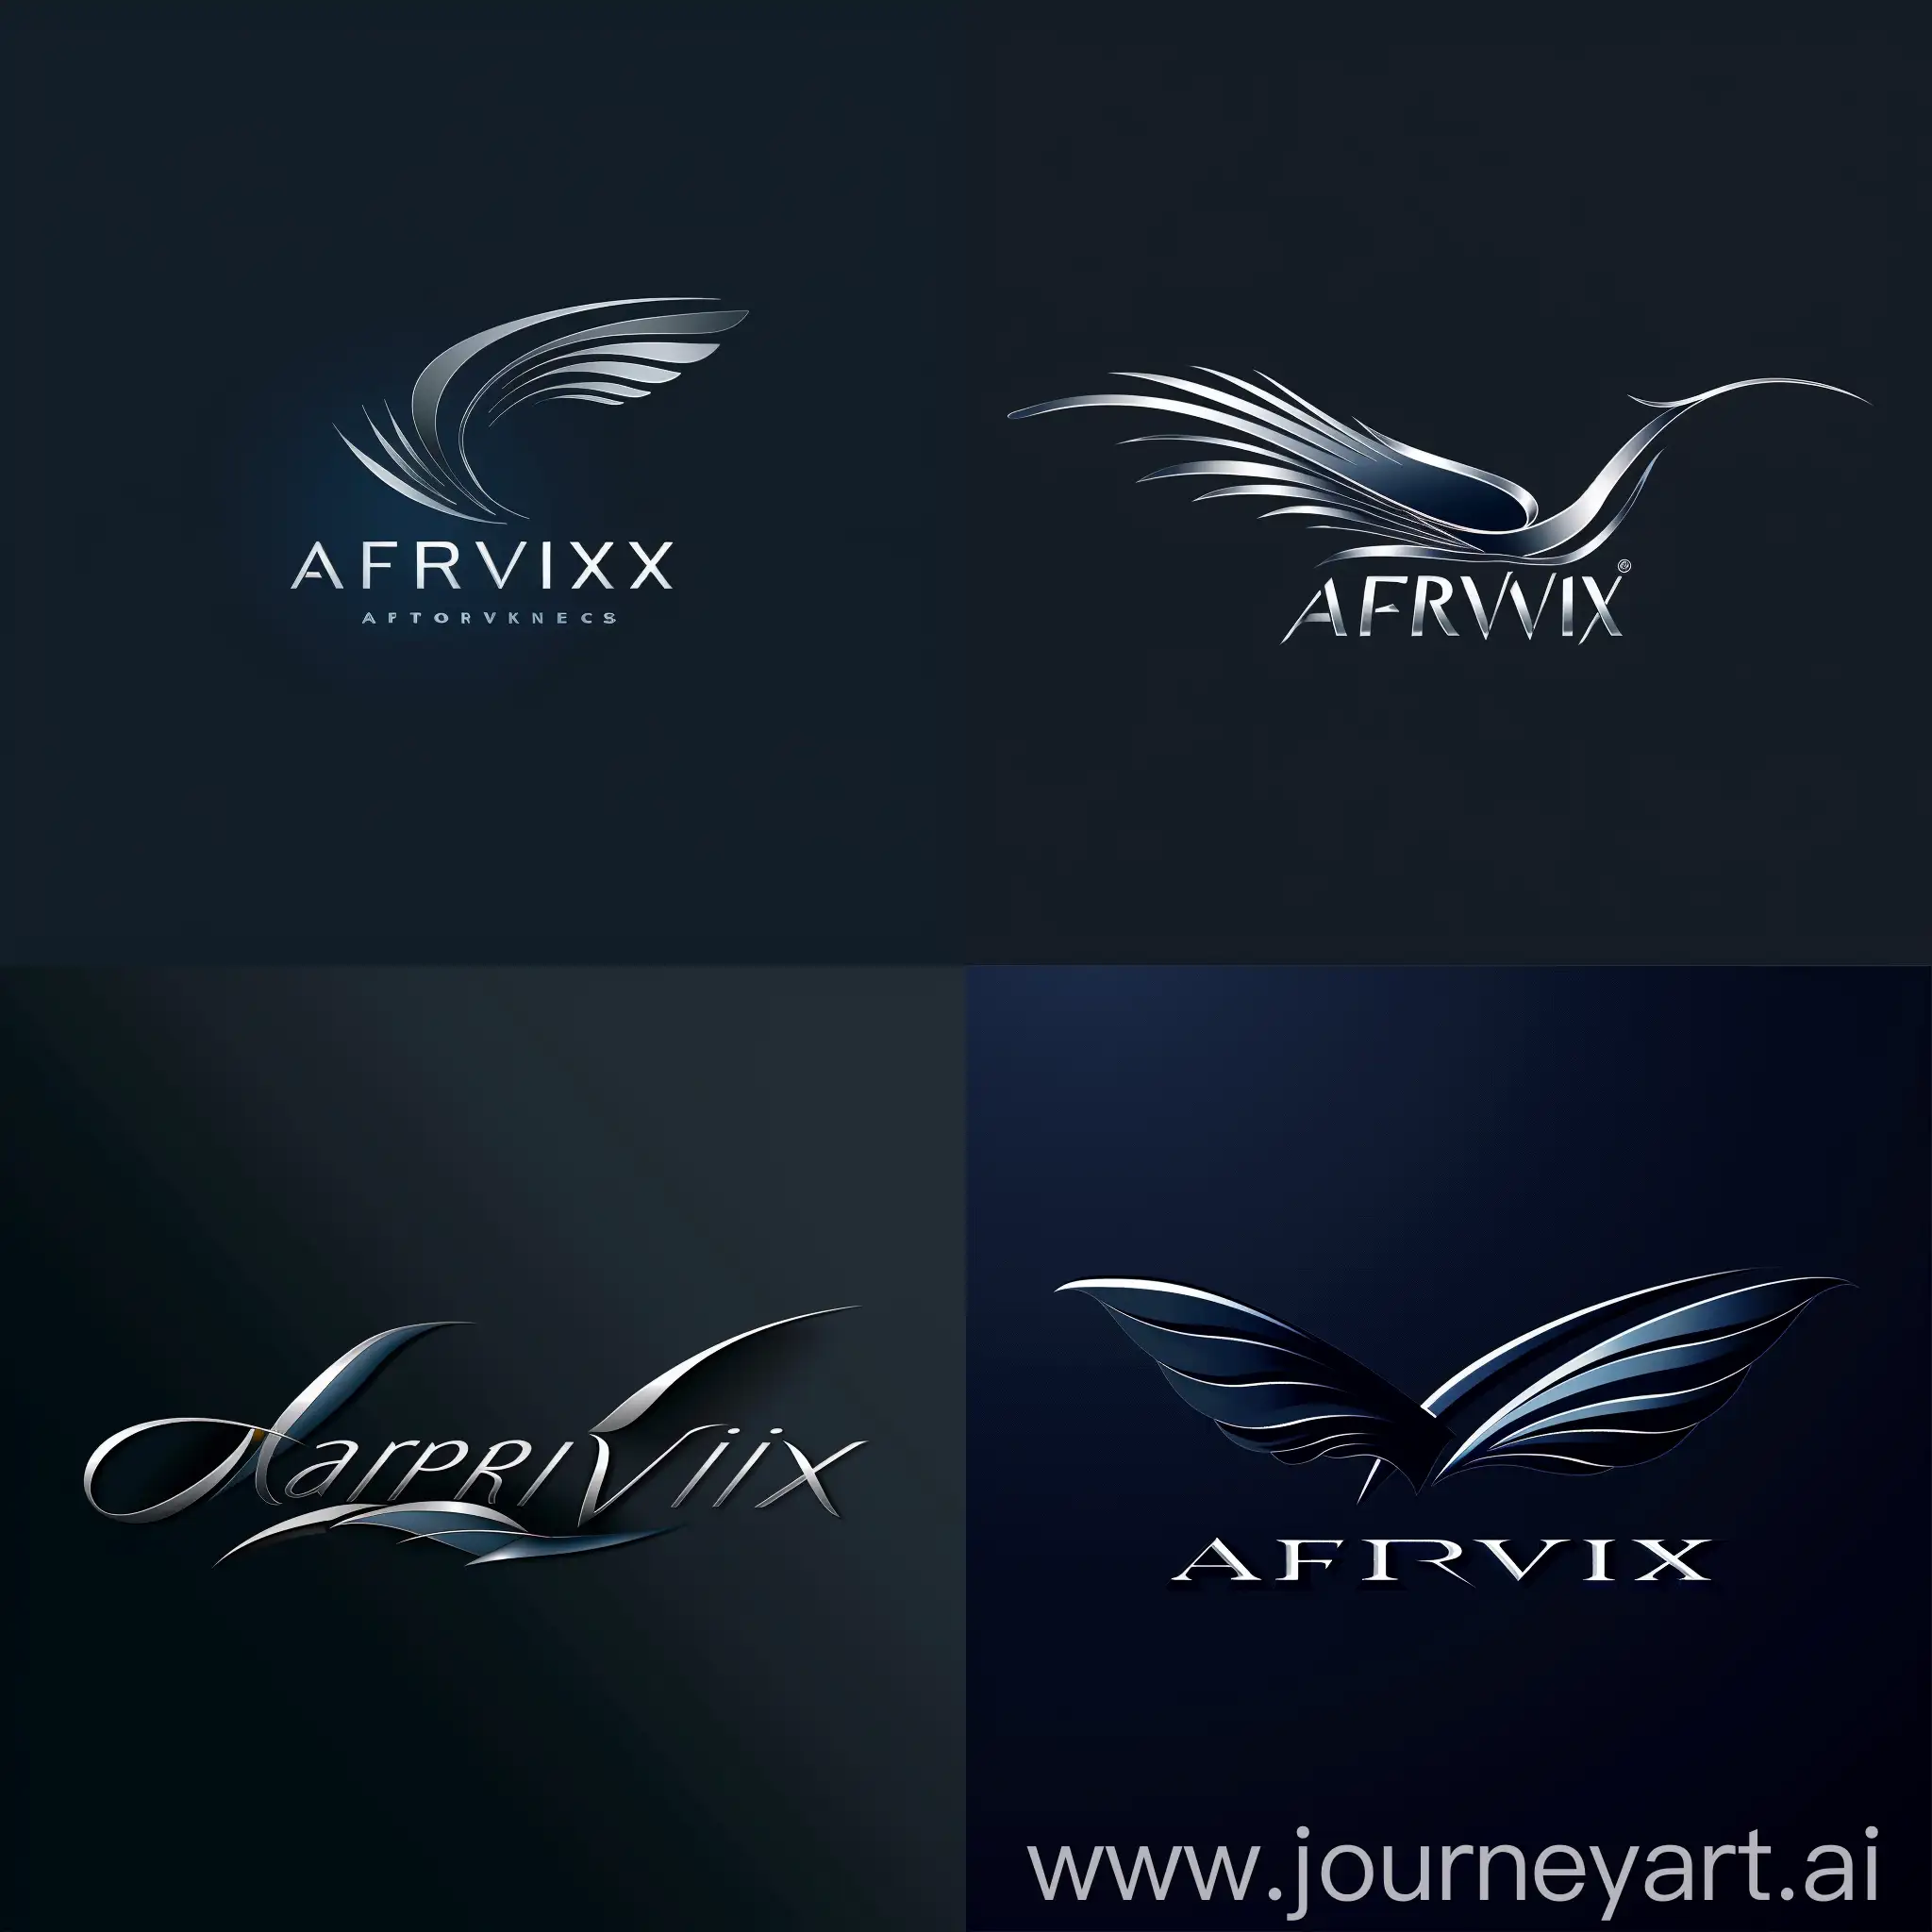 Elegant-and-Innovative-AeroVix-Airline-Logo-with-Stylized-Wing-Symbol